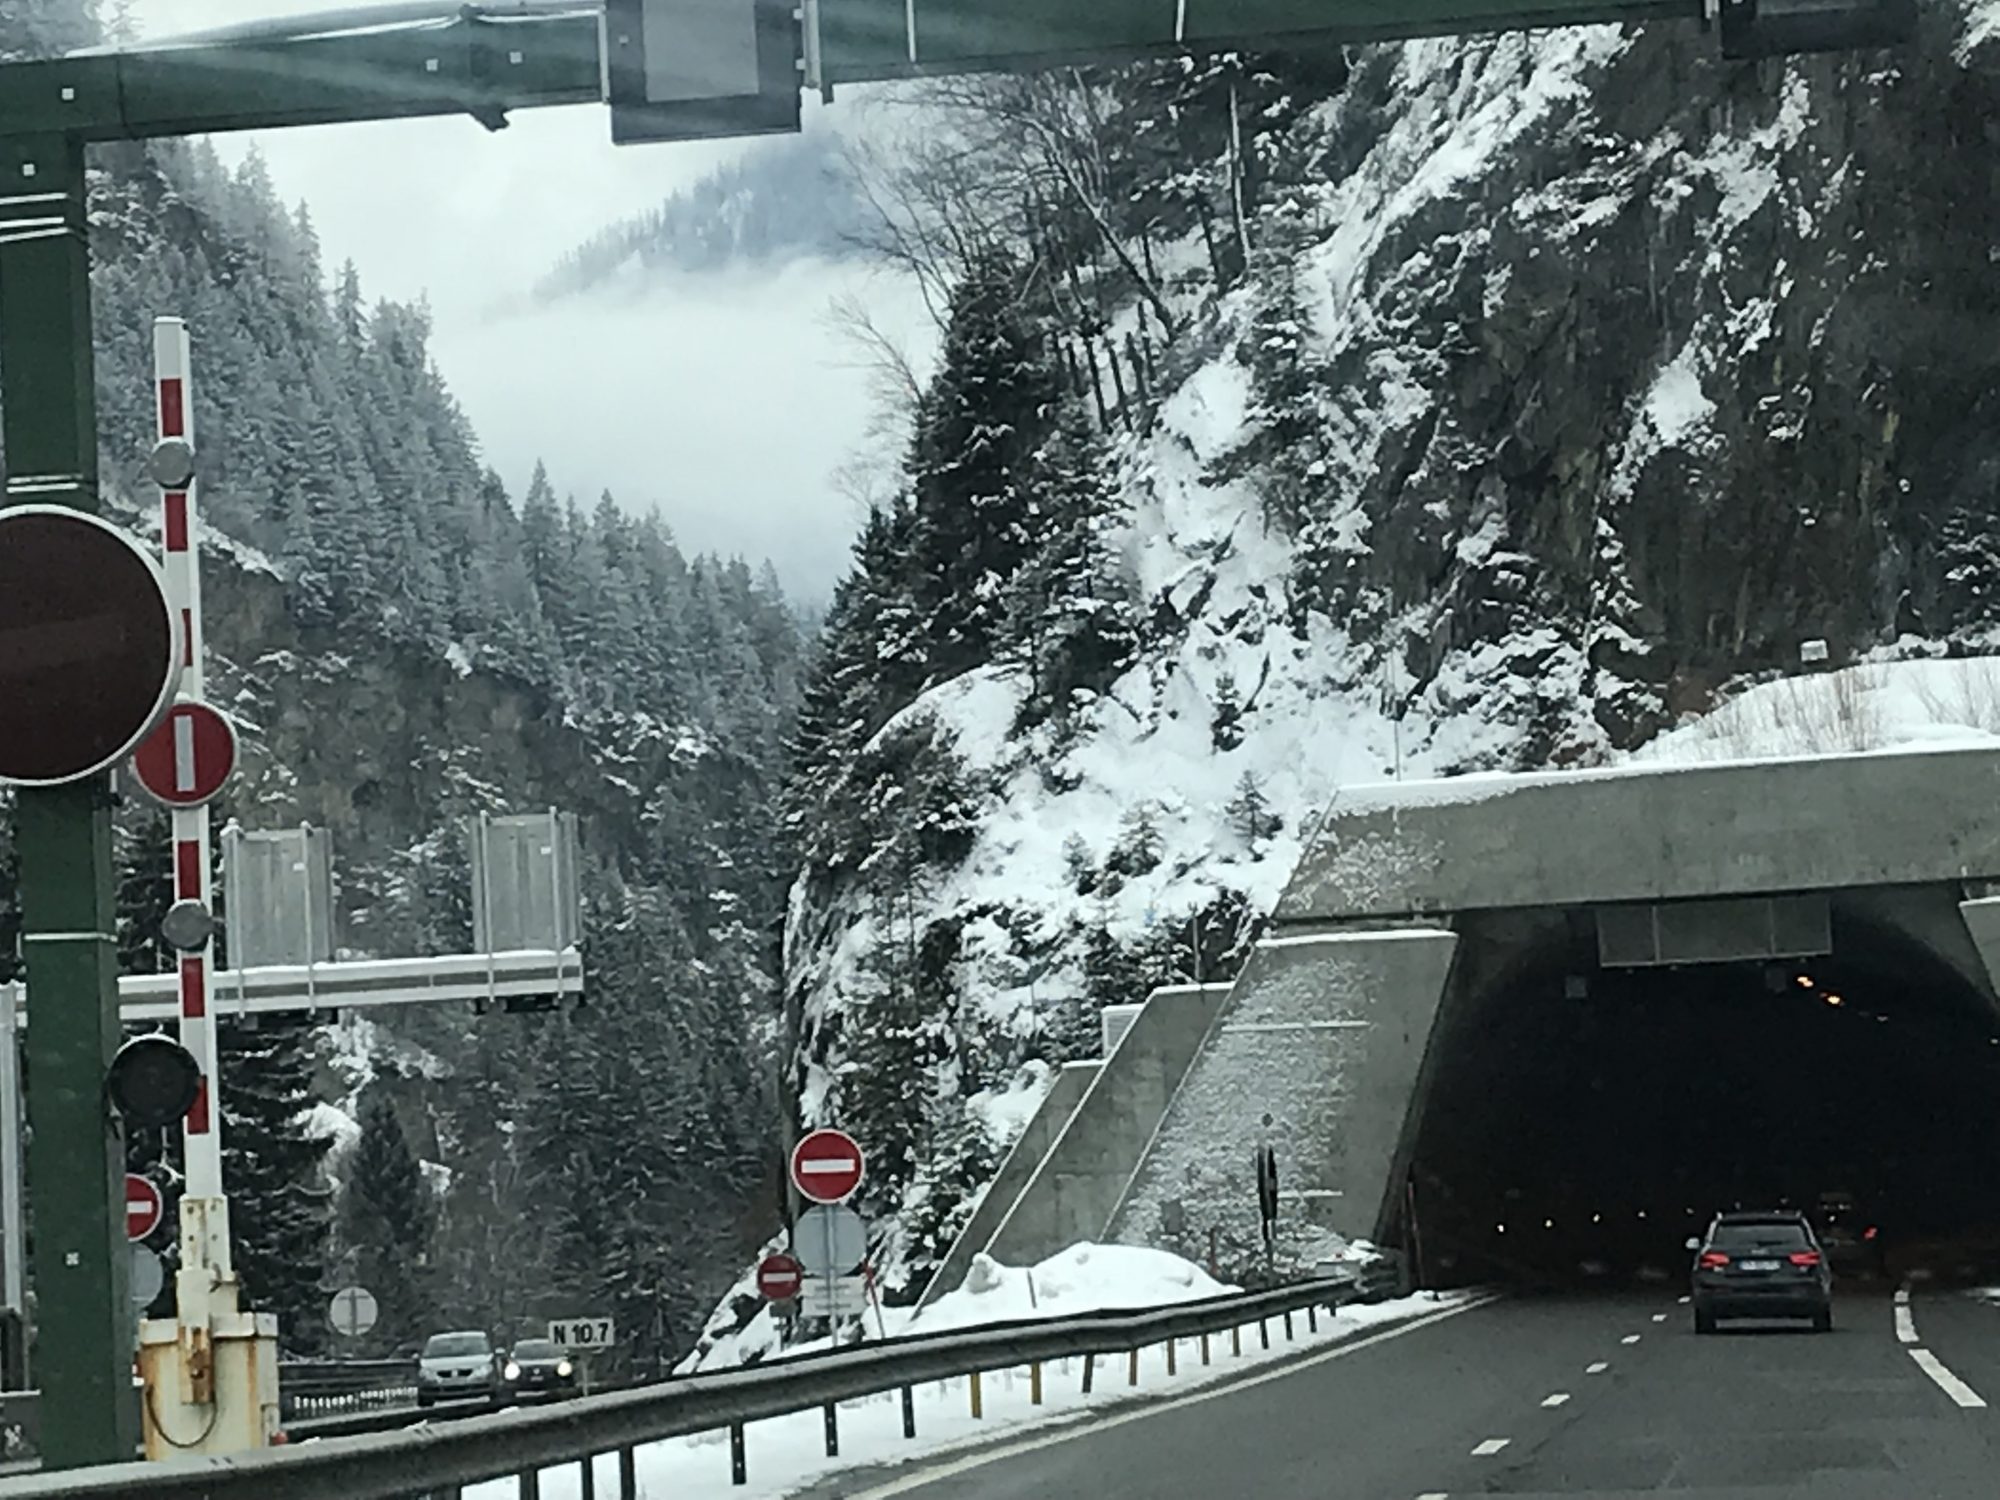 Autoroute du Mont Blanc - one of the nicest parts of the road. Photo by The-Ski-Guru.